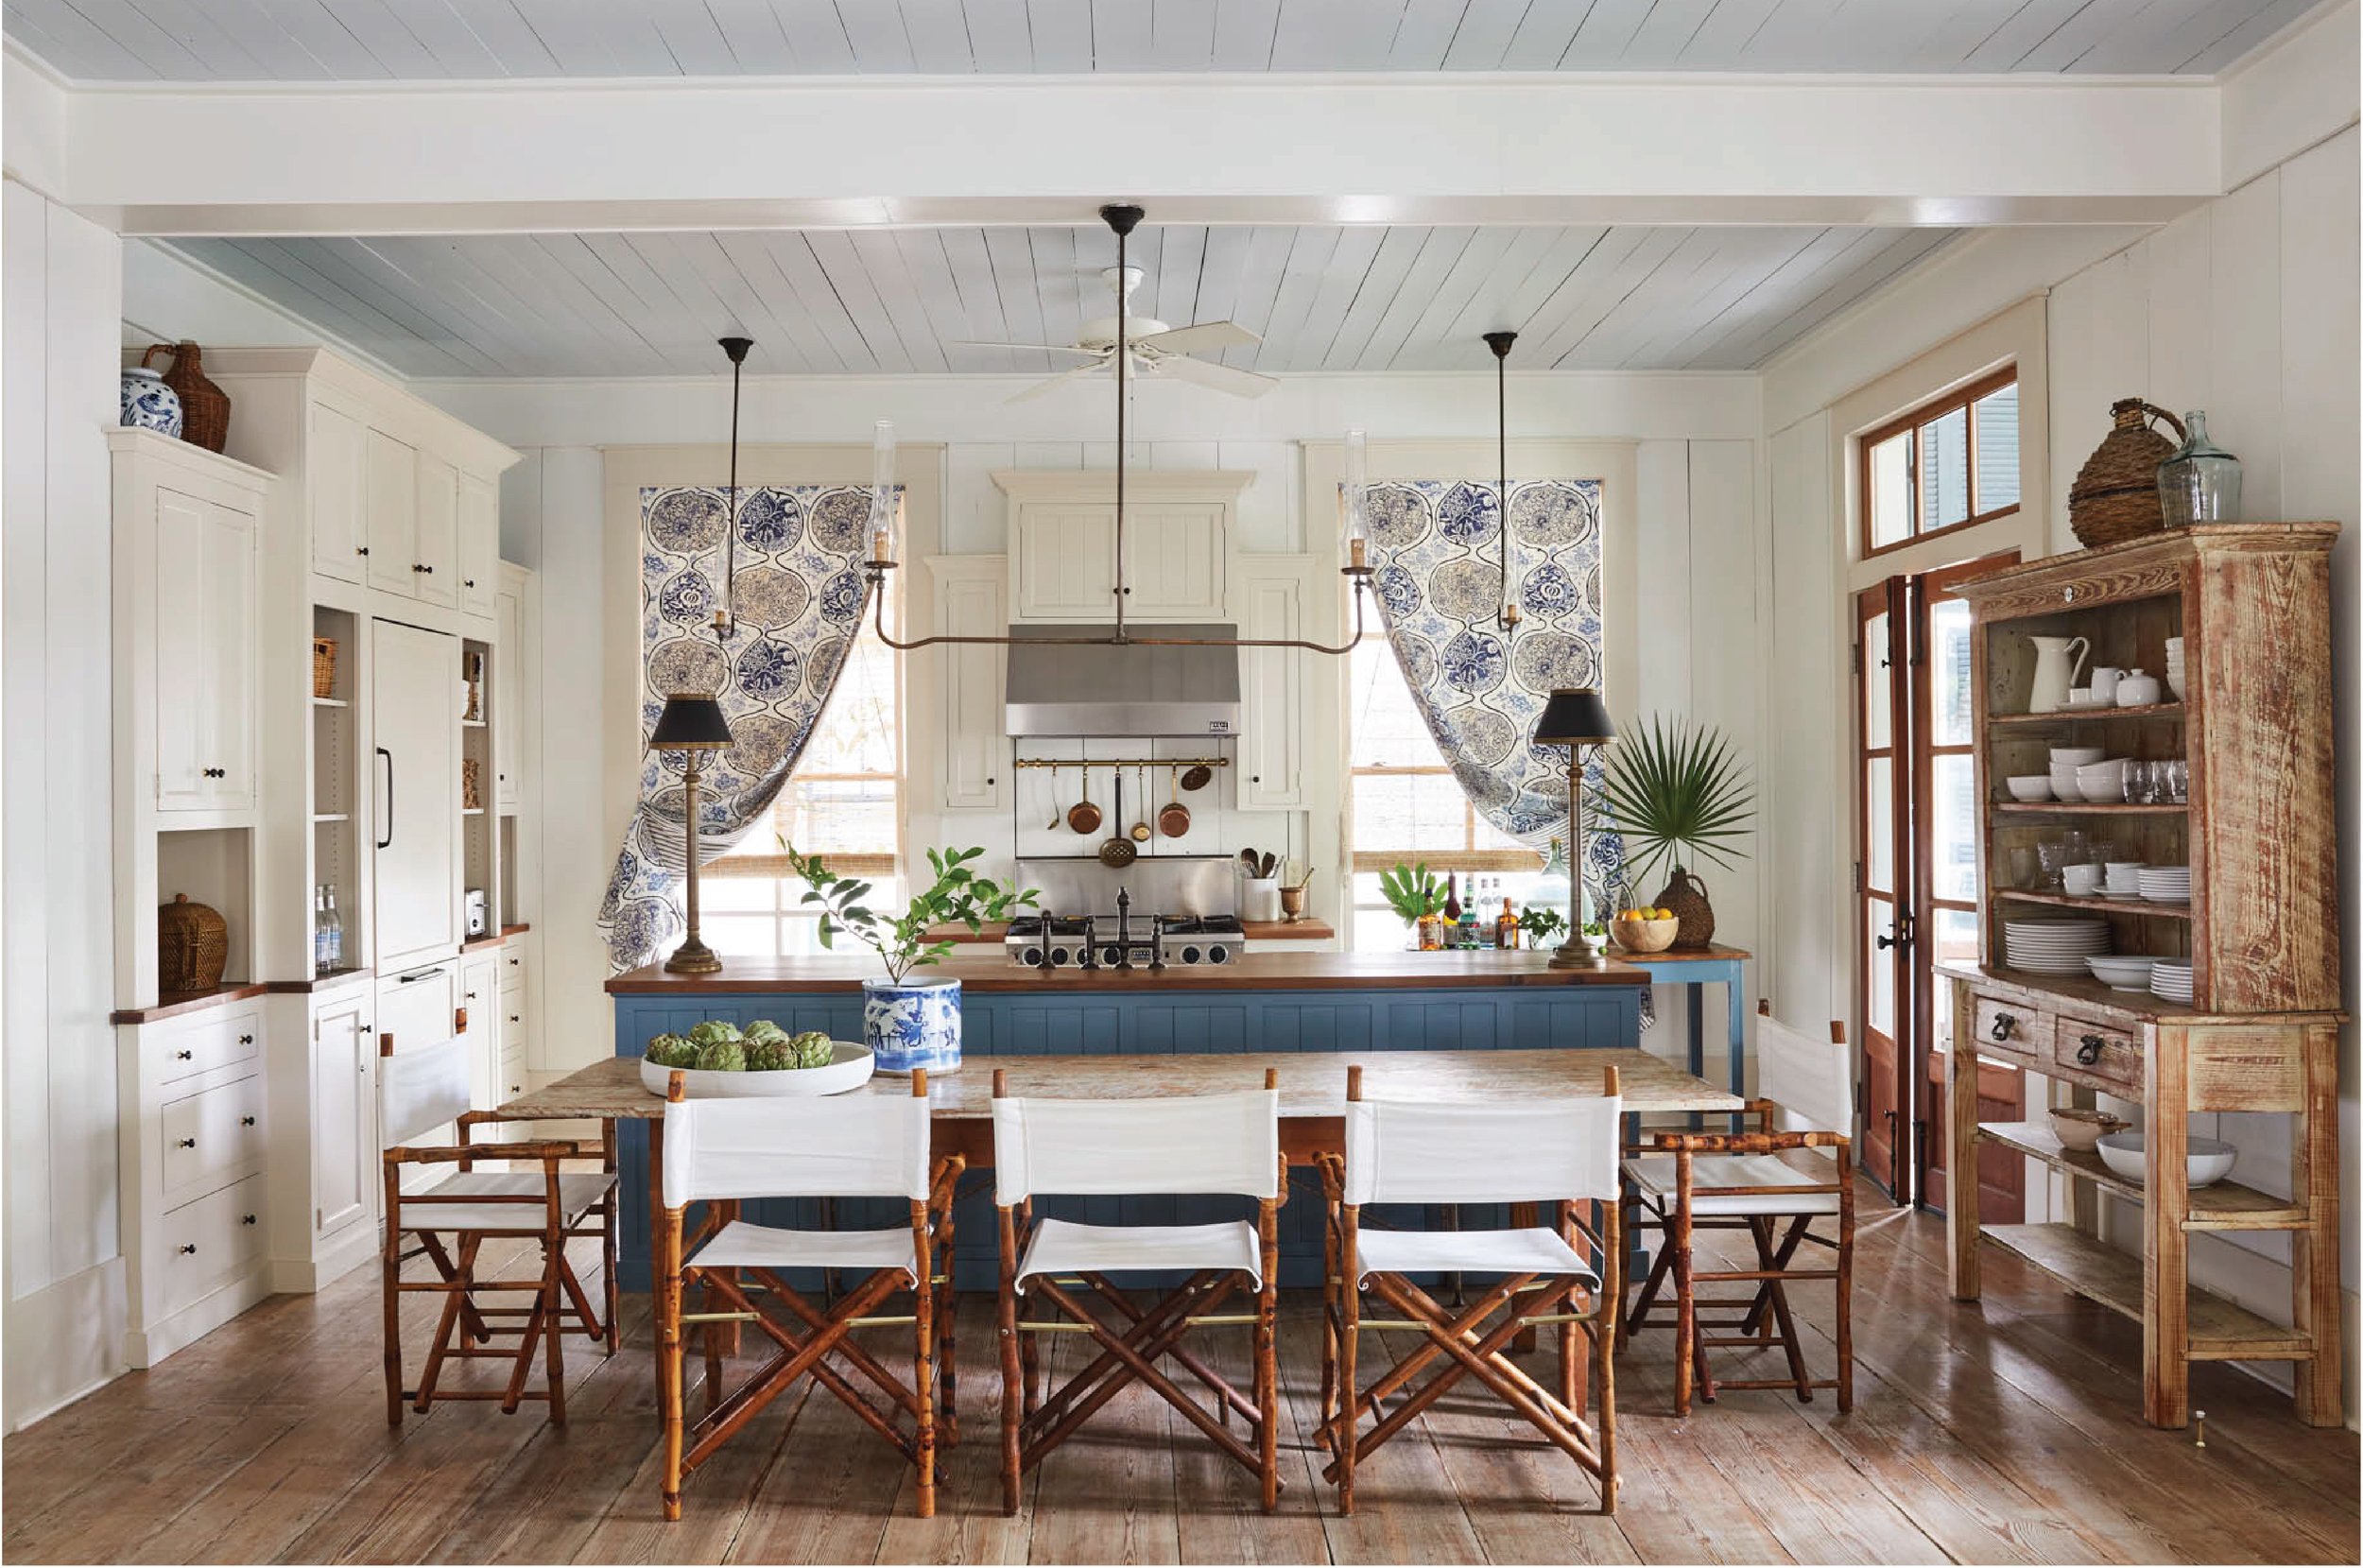 Rustic in white and blue kitchen featured in interiors designed by Heather Chadduck